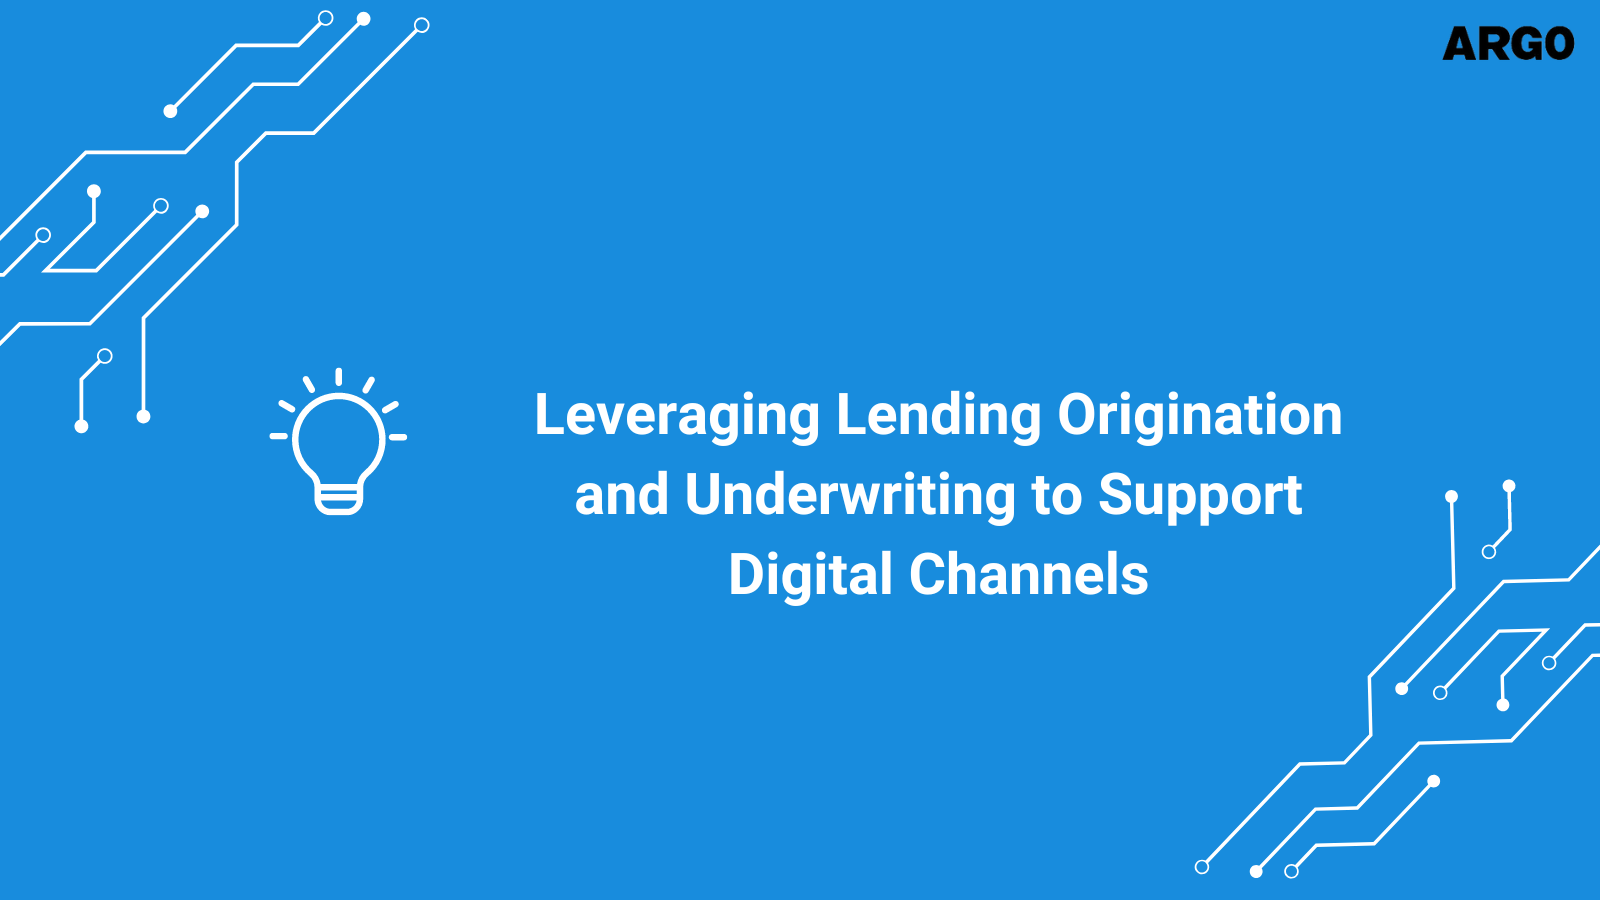 Leveraging Lending Origination and Underwriting to Support Digital Channels